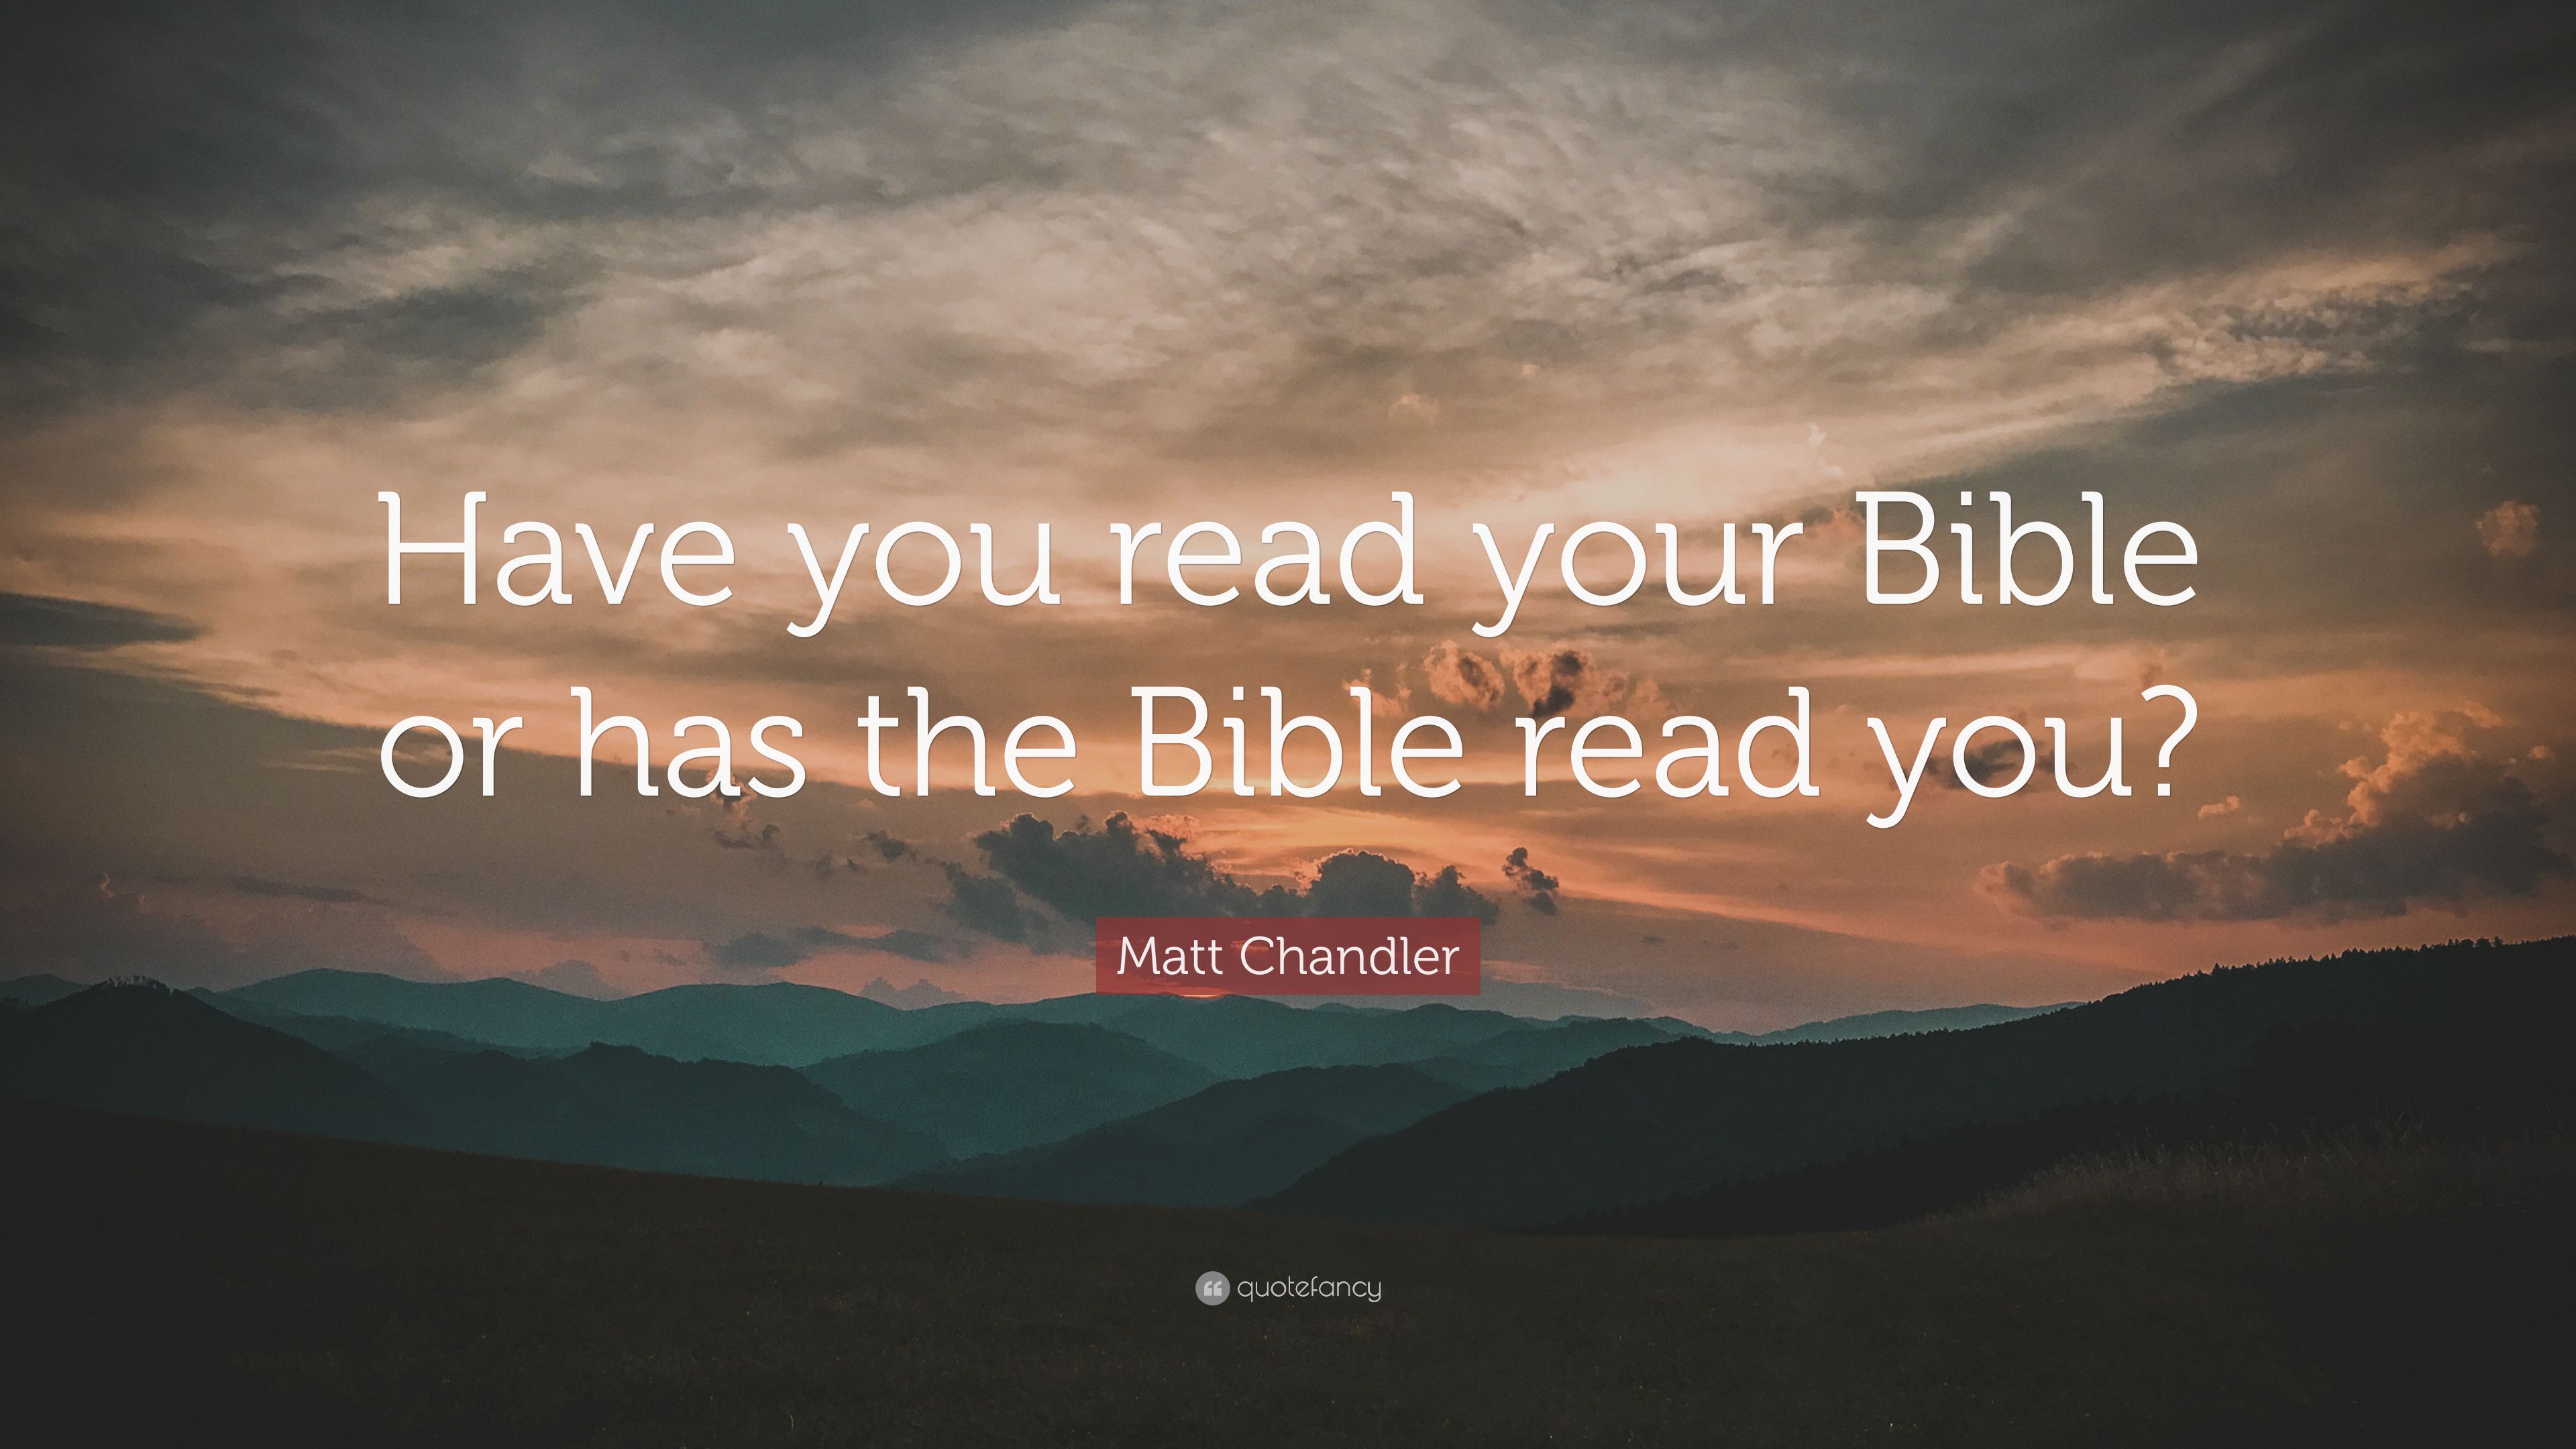 Matt Chandler Quote: “Have you read your Bible or has the Bible